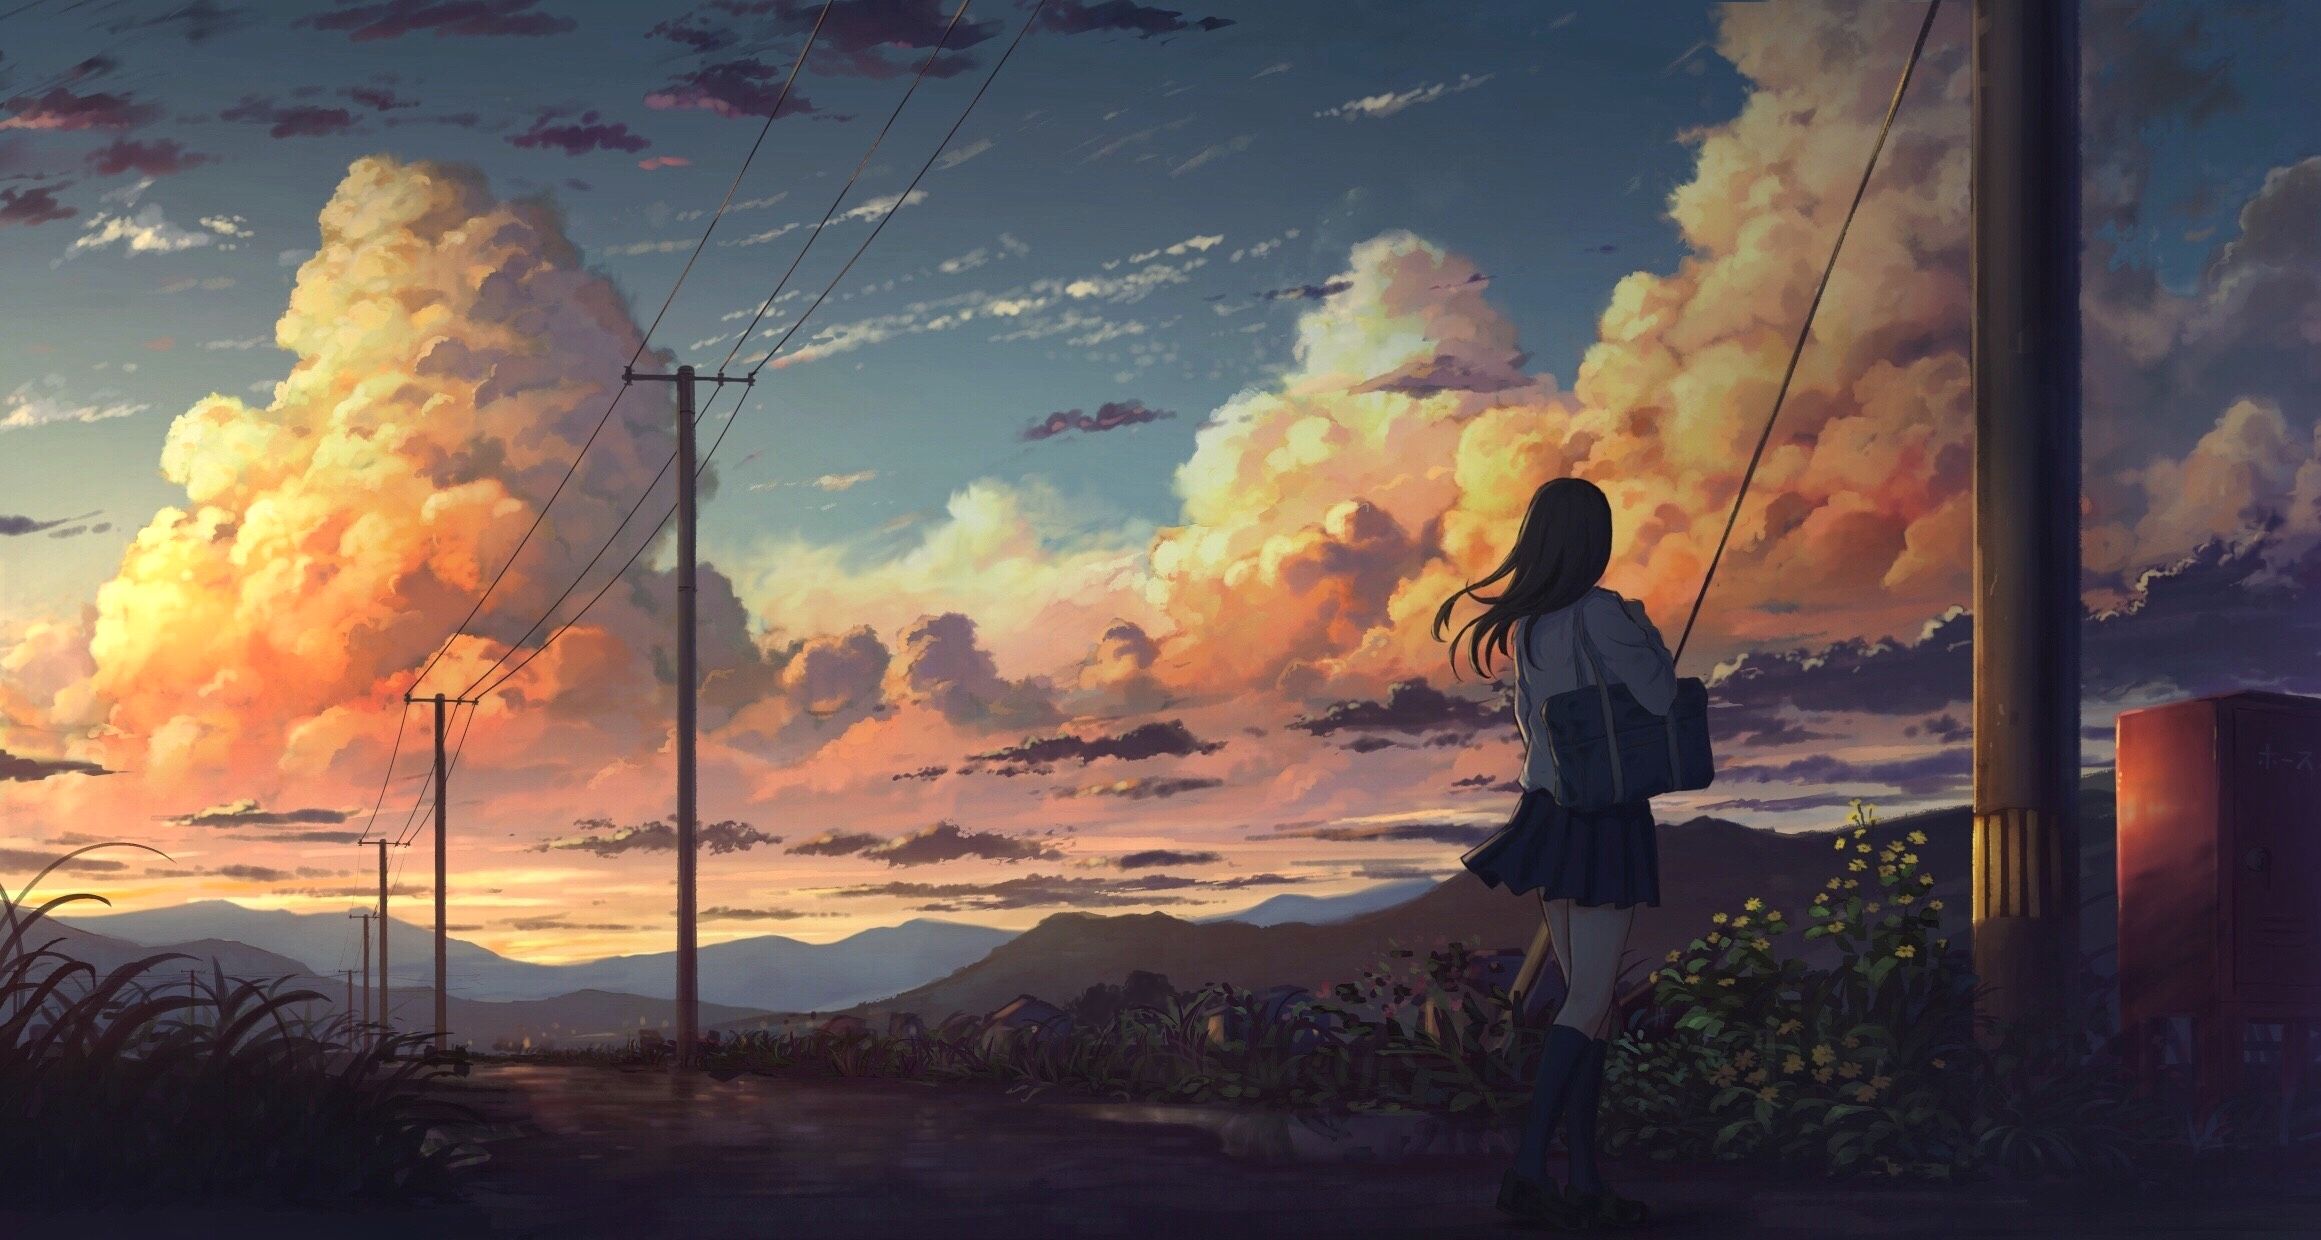 Download 3840x2160 Anime Landscape, Anime Girl, Clouds, Scenic, Sky Wallpaper for UHD TV